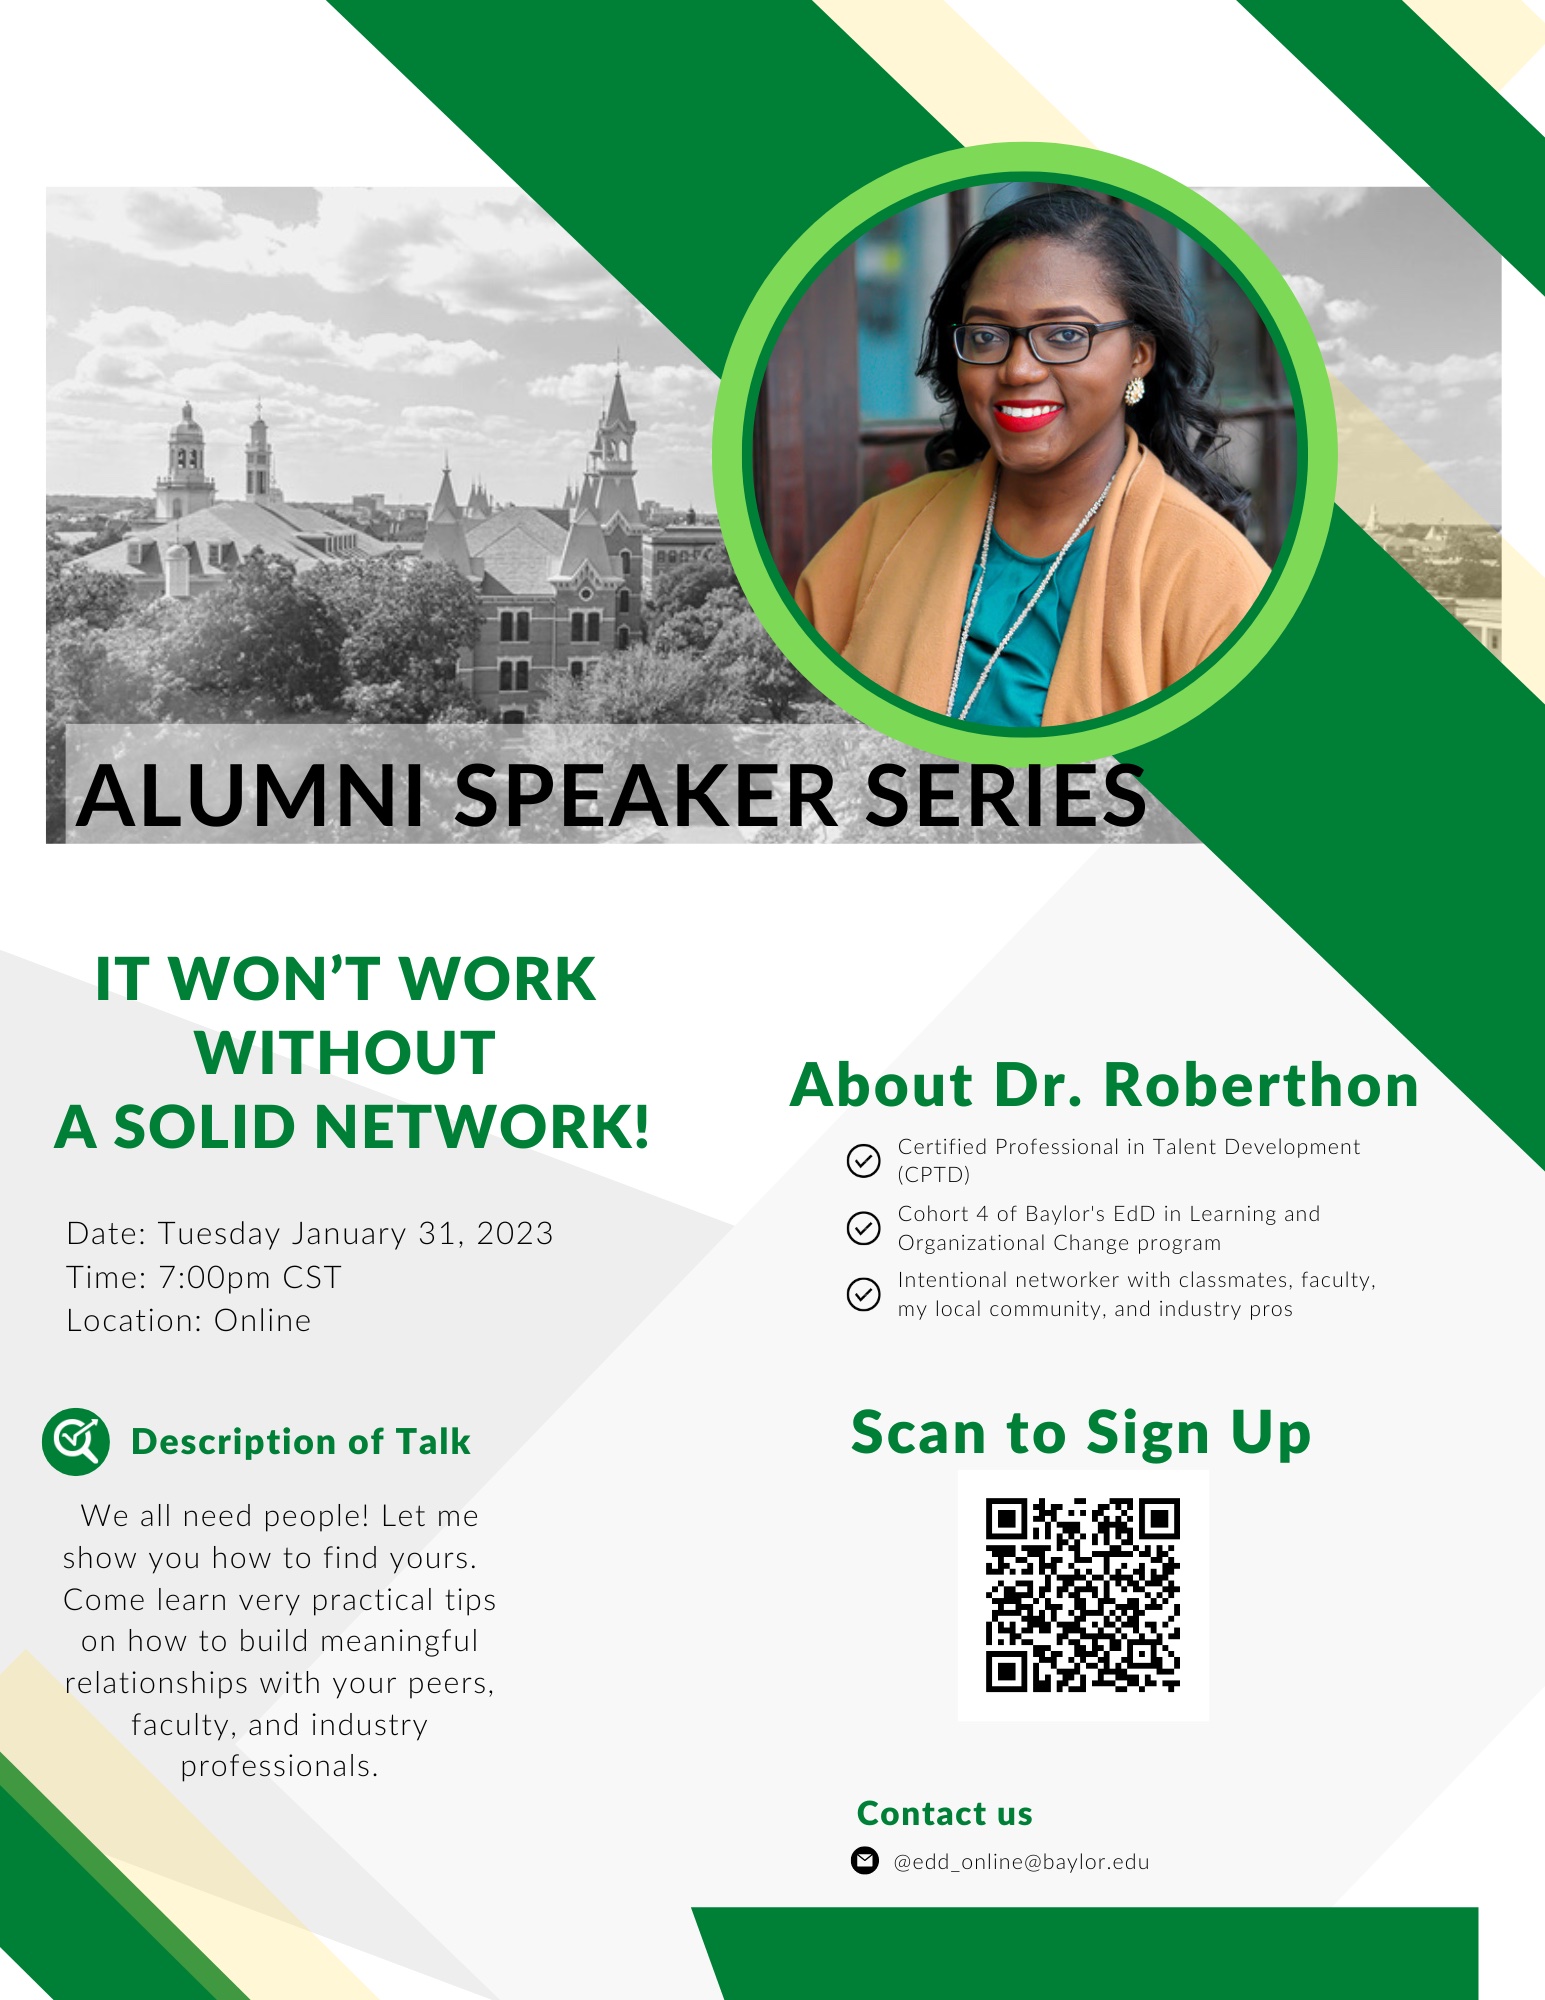 Alumni Speaker Series. It won’t work without a solid network! Description of talk: We all need people! Let me show you how to find yours. Come learn very practical tips on how to build meaningful relationships with your peers, faculty, and industry professionals. Tuesday January 31, 2023. 7 pm CST. Online. Scan to sign up.